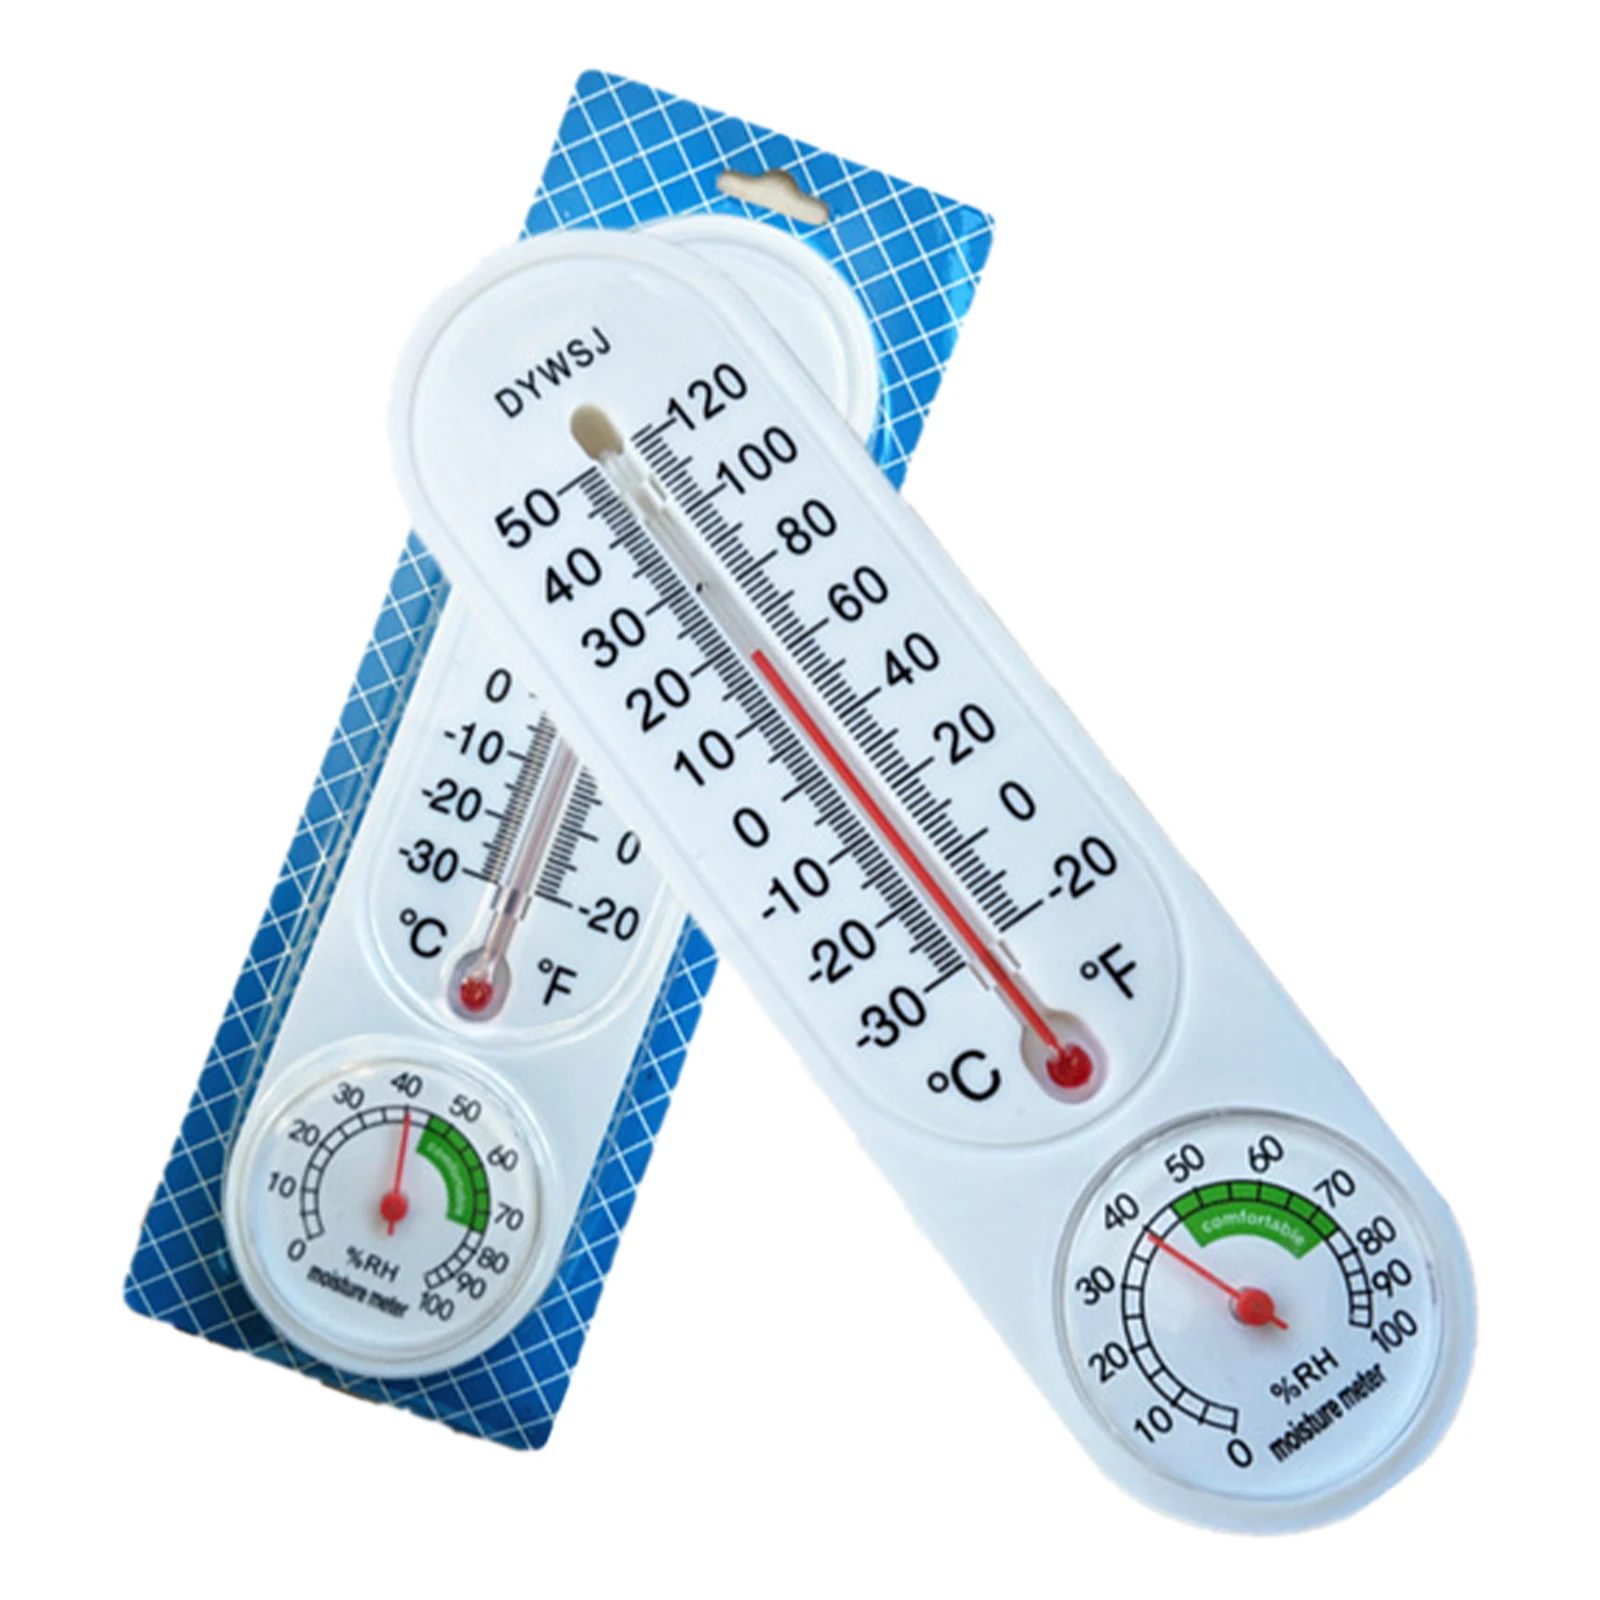 https://ae01.alicdn.com/kf/S72e2680cb0924dec8dcfd2ed58a4a74fL/Wall-Hanging-Thermometer-for-Indoor-Outdoor-Home-Garden-Greenhouse-Planting-Humidity-Meter-Temperature-Monitor-Measurement-Tool.jpg